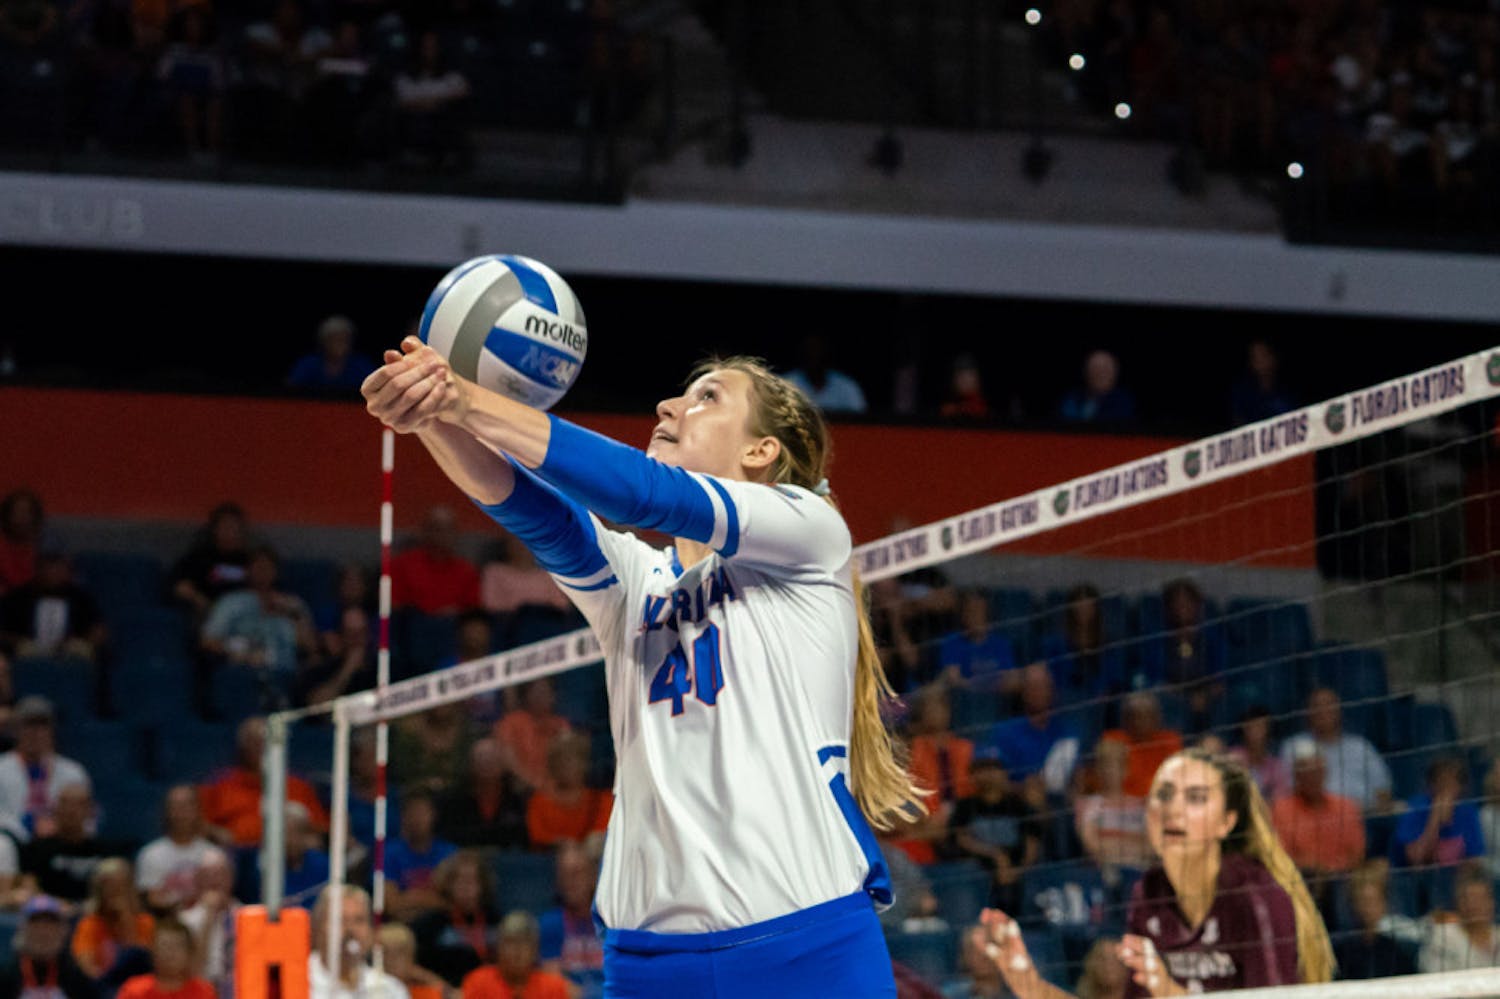 Sophomore setter Holly Carlton recorded a team-high nine kills on 17 attacks in Sunday afternoon’s win against Alabama. The 6-foot-7 Carlton also set a career-high with four service aces.